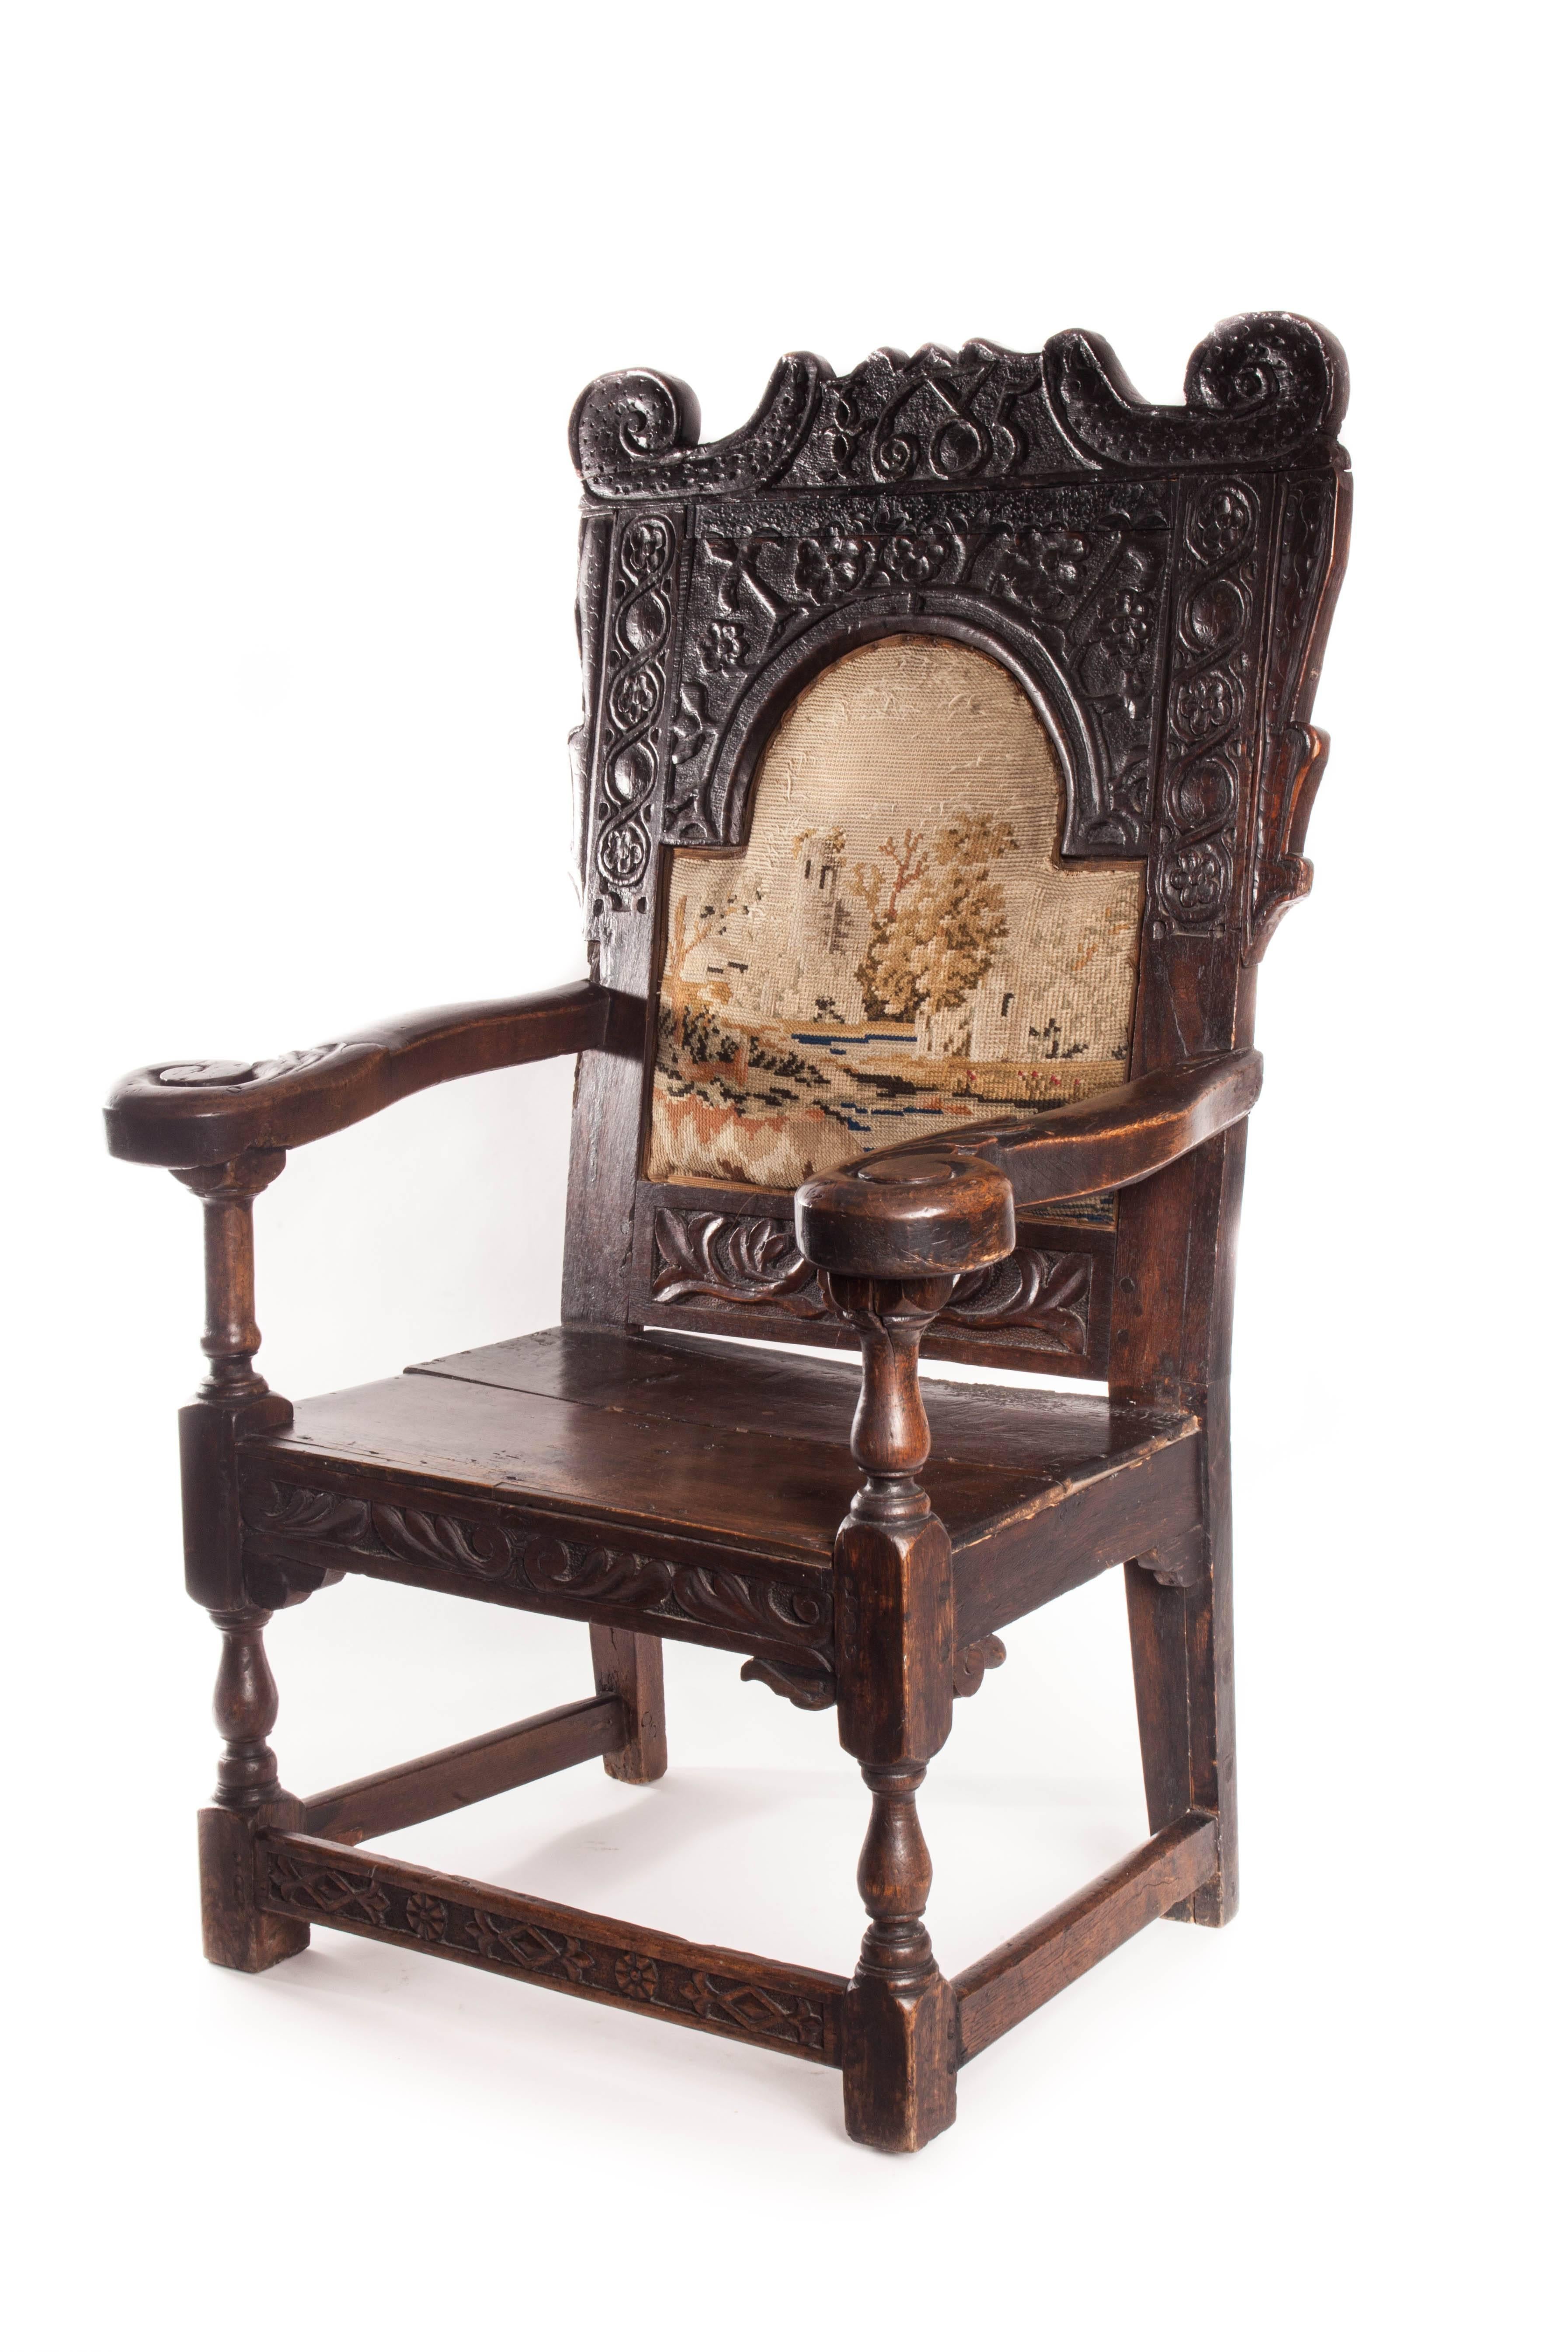 Beautiful 17th century English Jacobean armchair. Carved floral motifs and inset tapestry back. Date is carved into the back head rest, 1685.